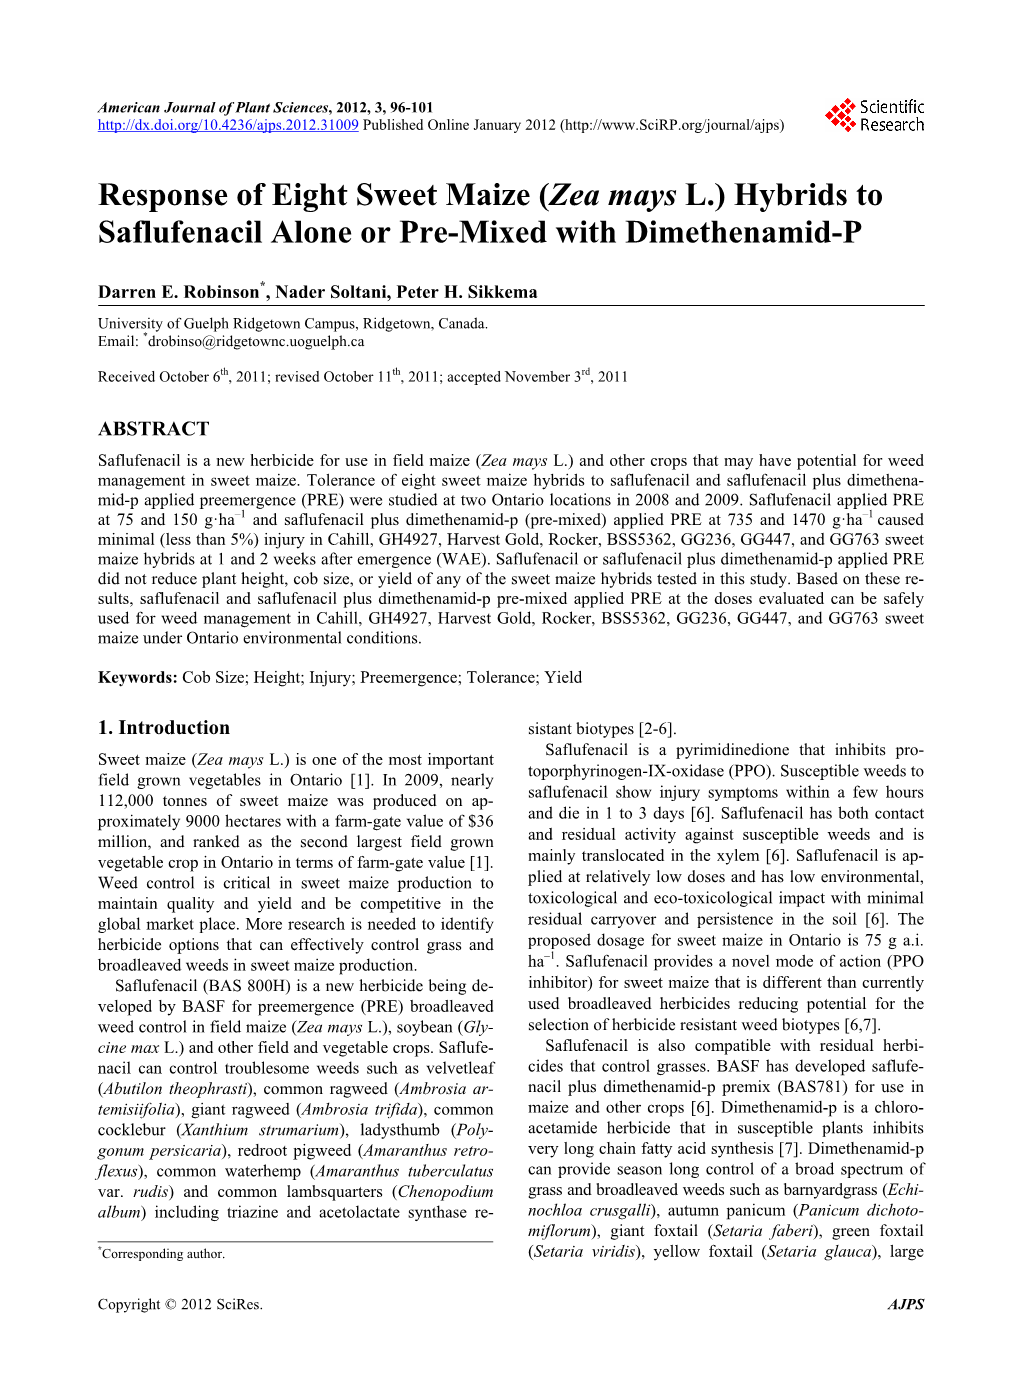 (Zea Mays L.) Hybrids to Saflufenacil Alone Or Pre-Mixed with Dimethenamid-P